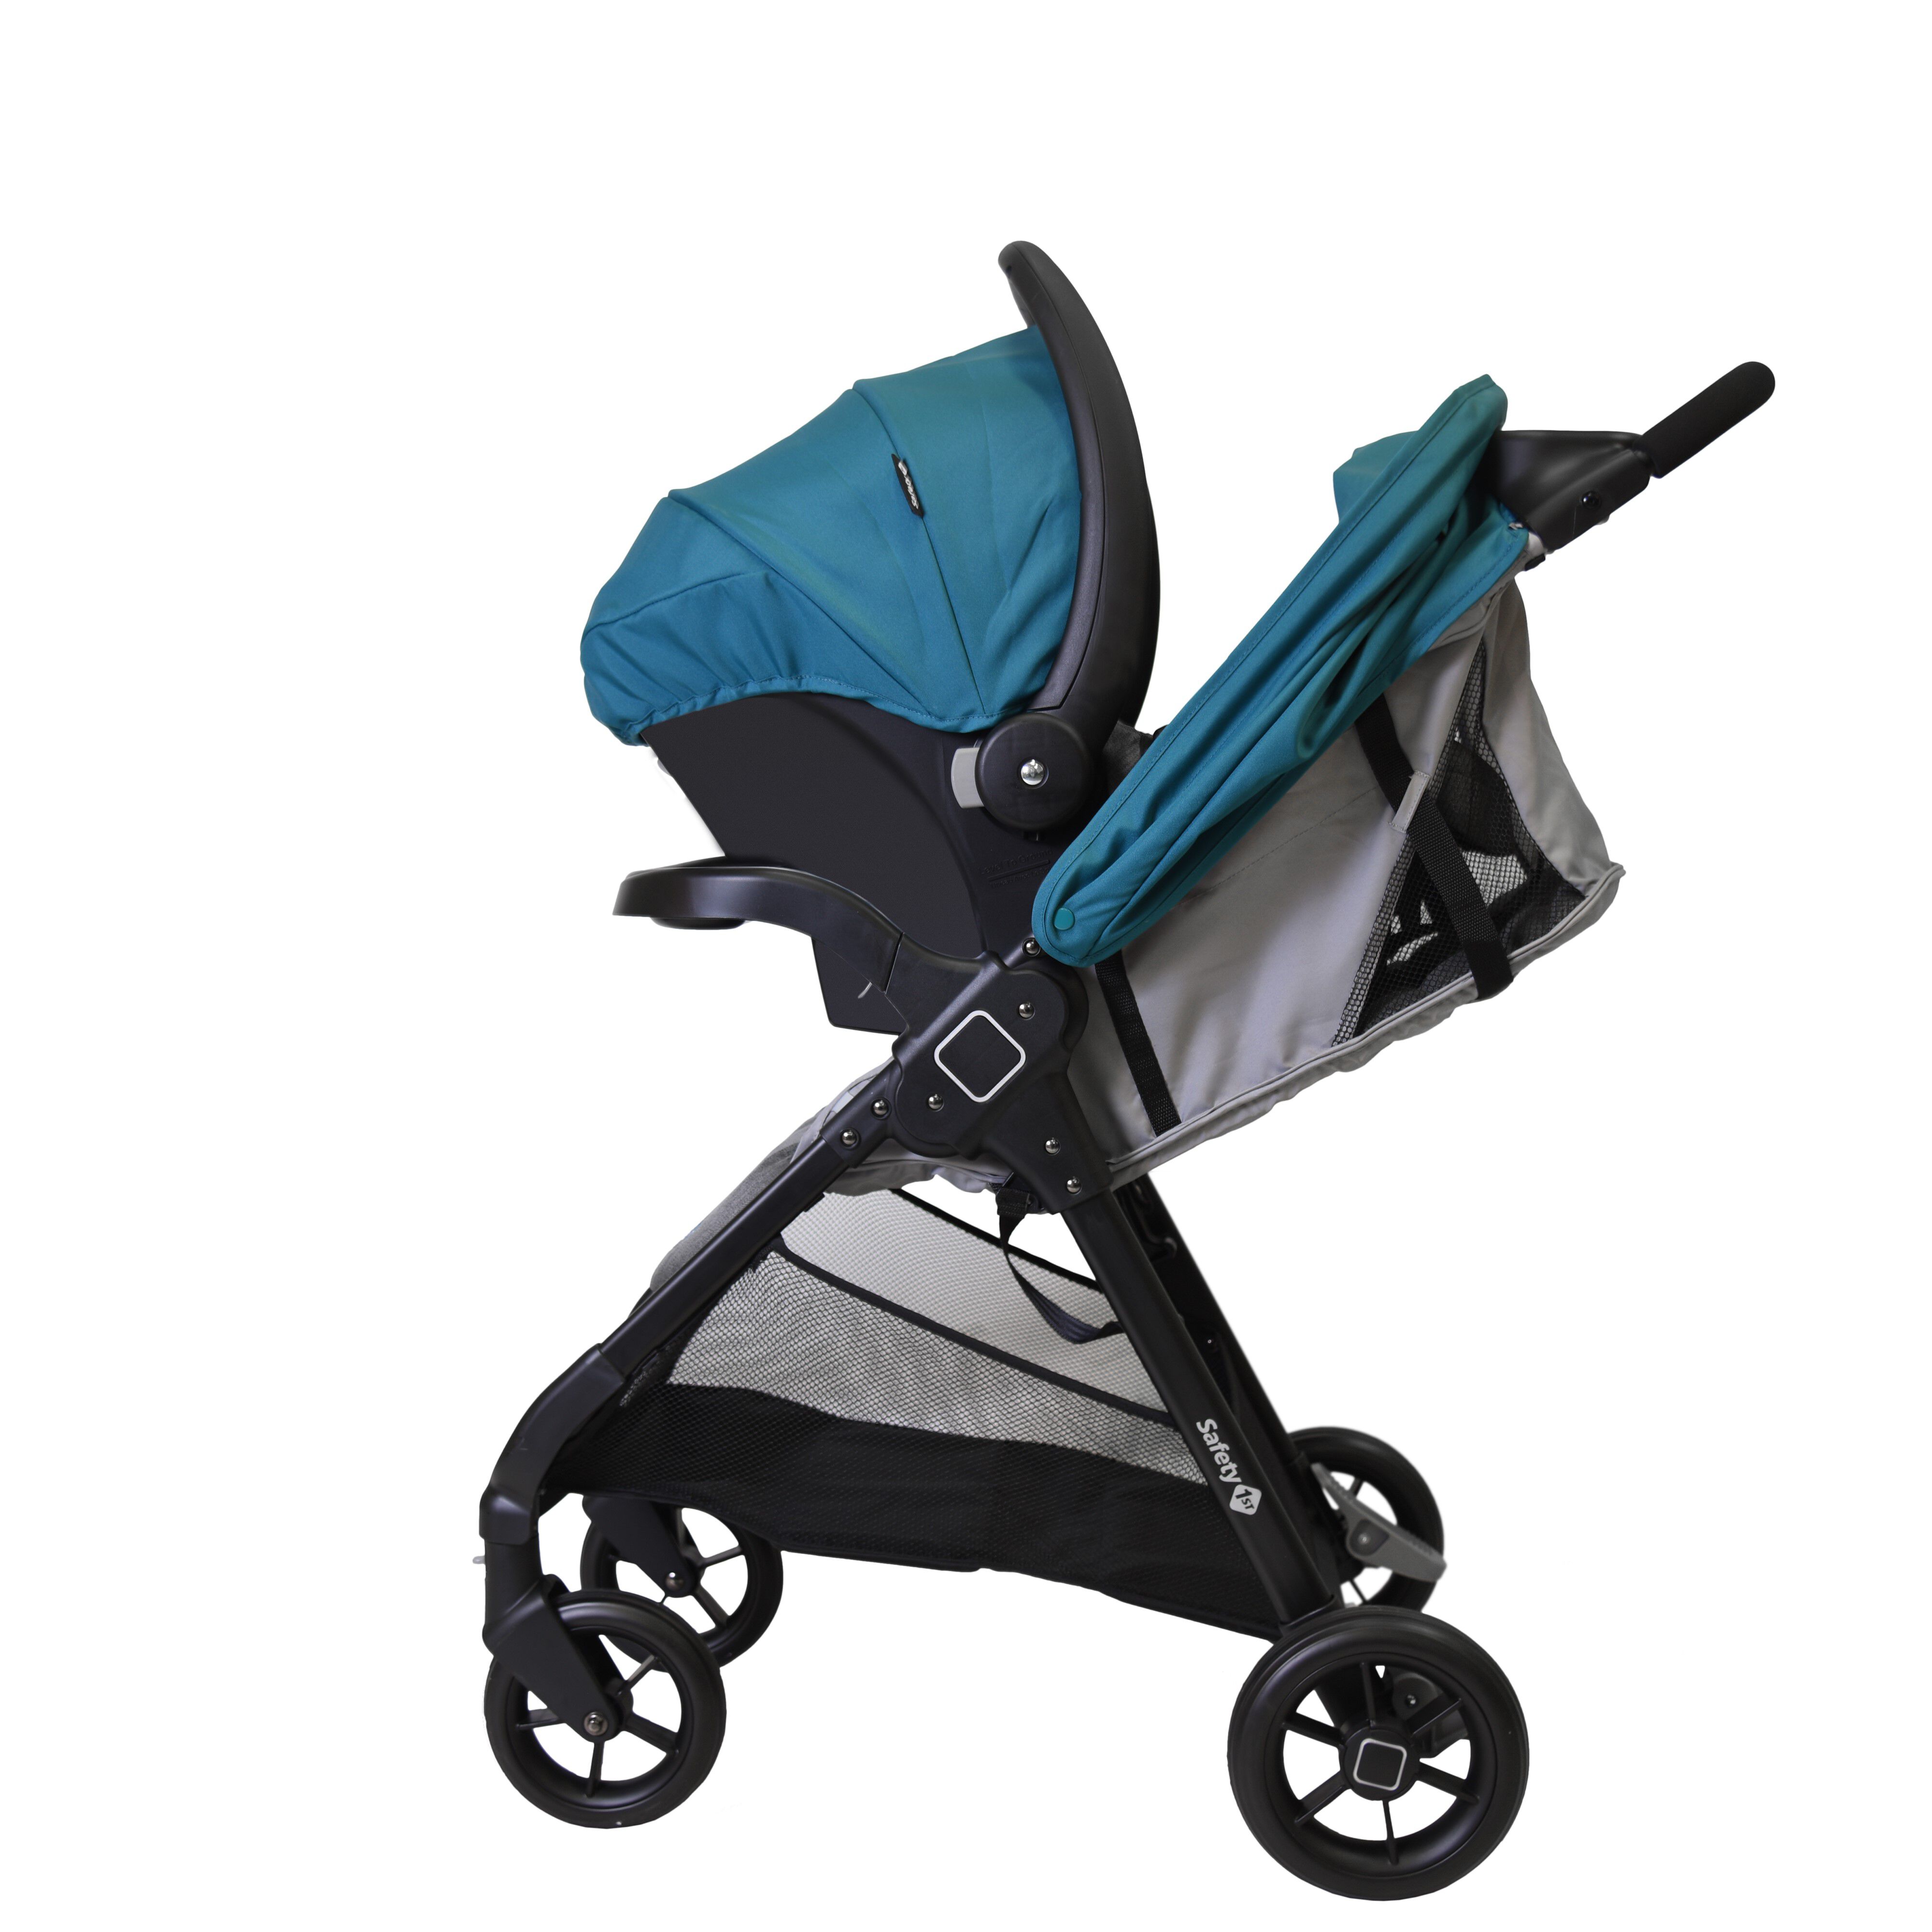 safety 1st travel system reviews